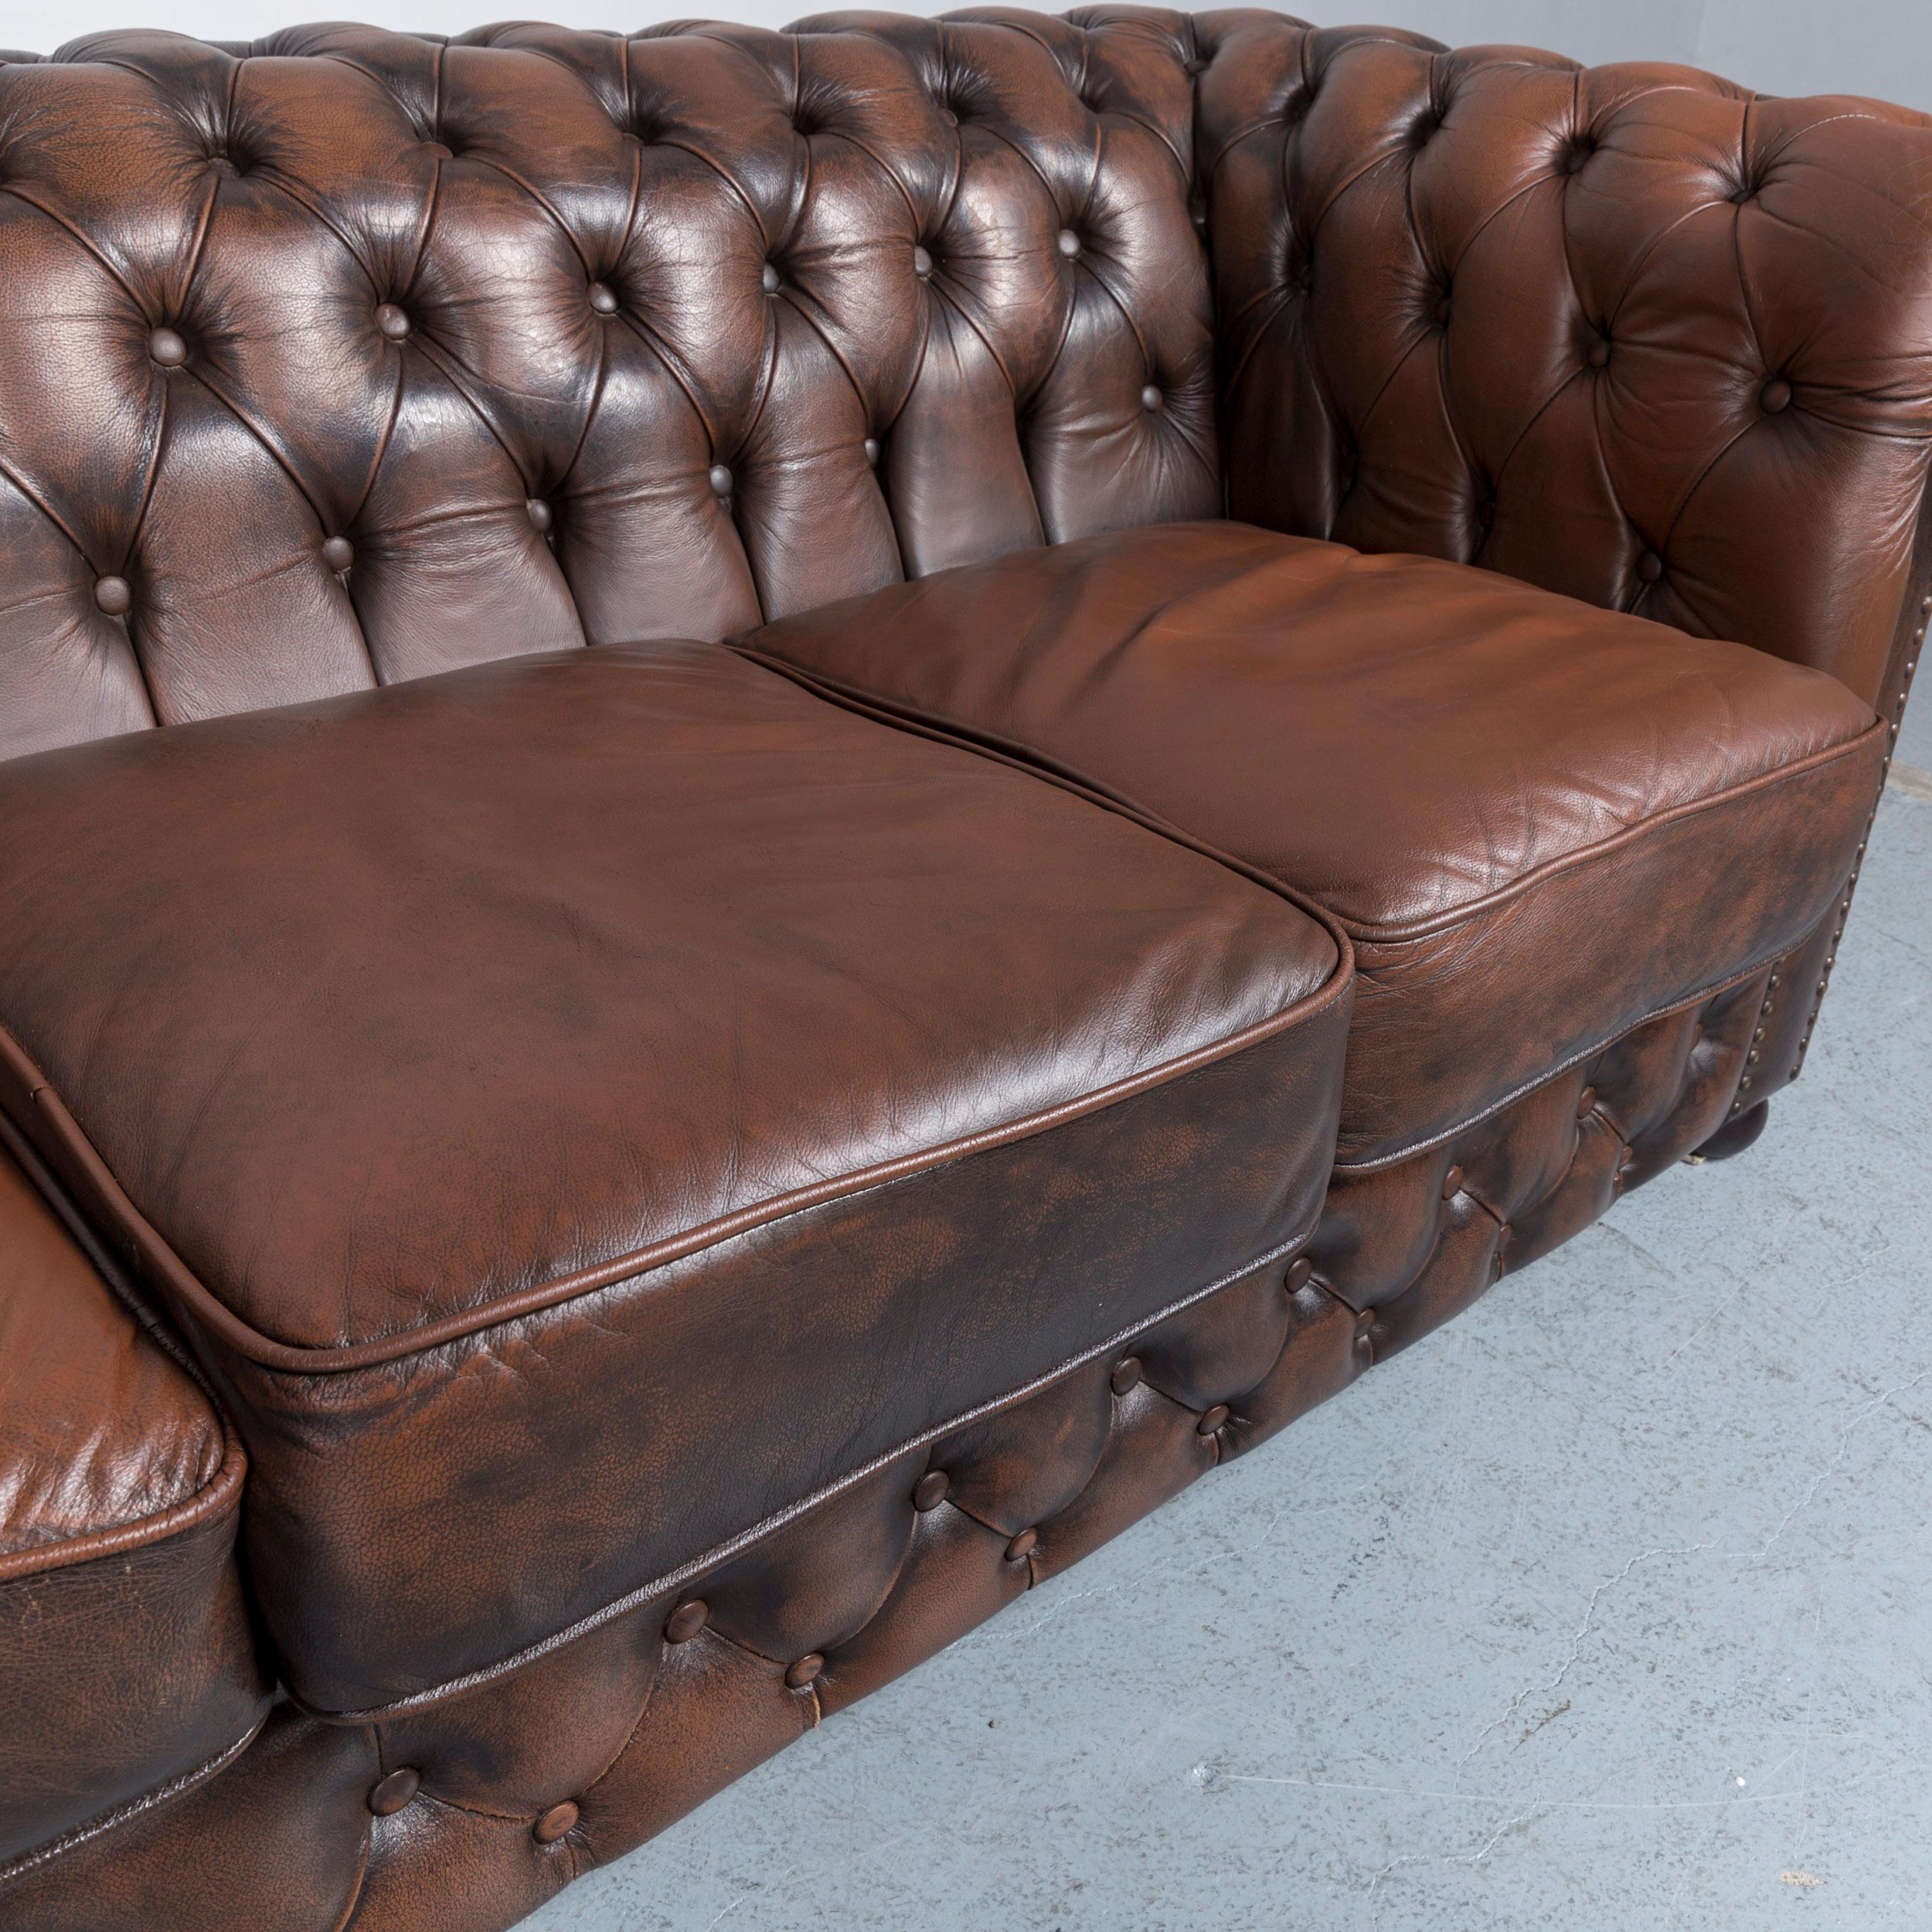 Contemporary Chesterfield Leather Sofa Brown Three-Seat Armchair Set Vintage Retro